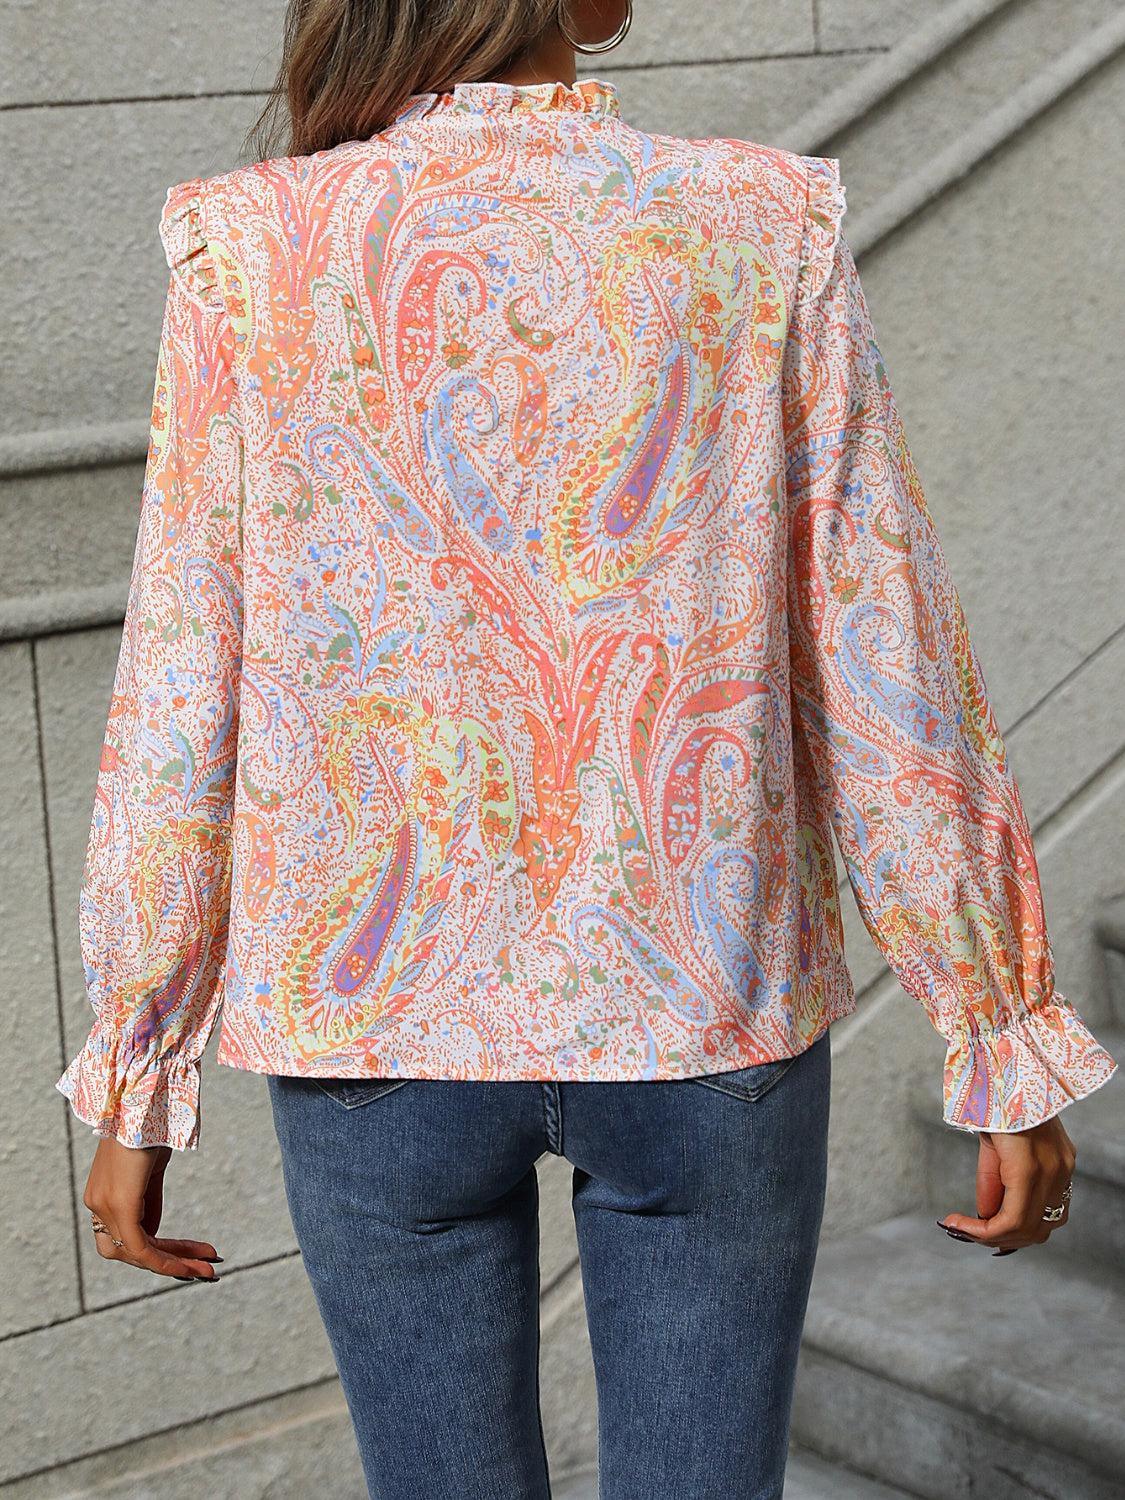 a woman wearing a paisley blouse and jeans